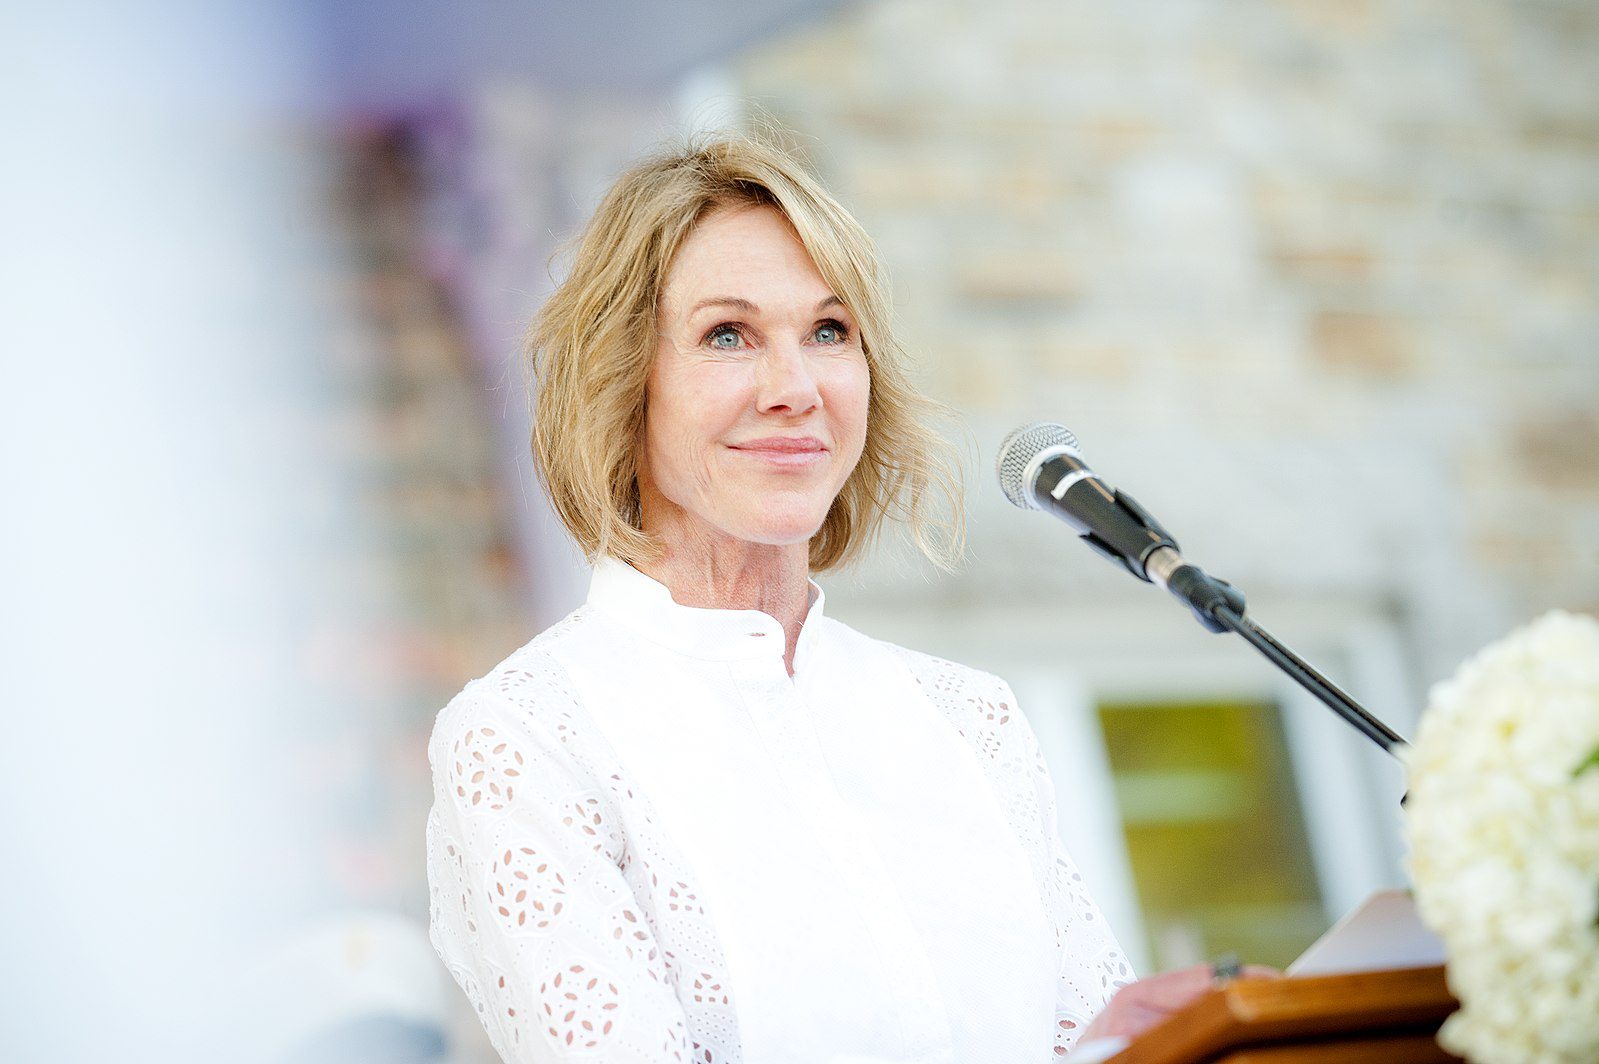 kelly_knight_craft_speaking_at_independence_day_celebration_43589702801